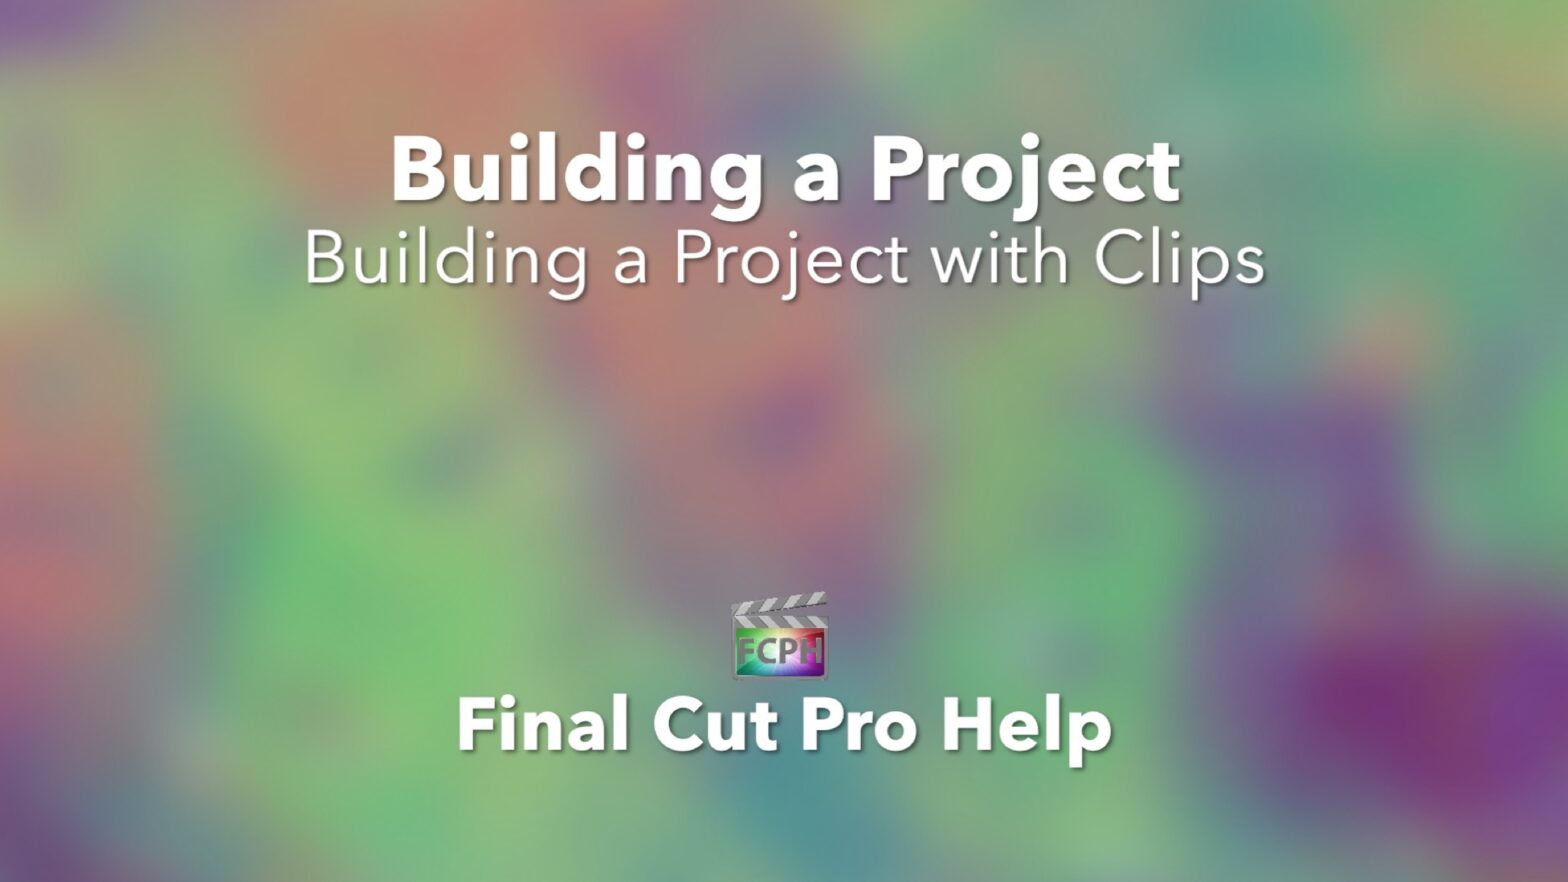 Building a Project with Clips